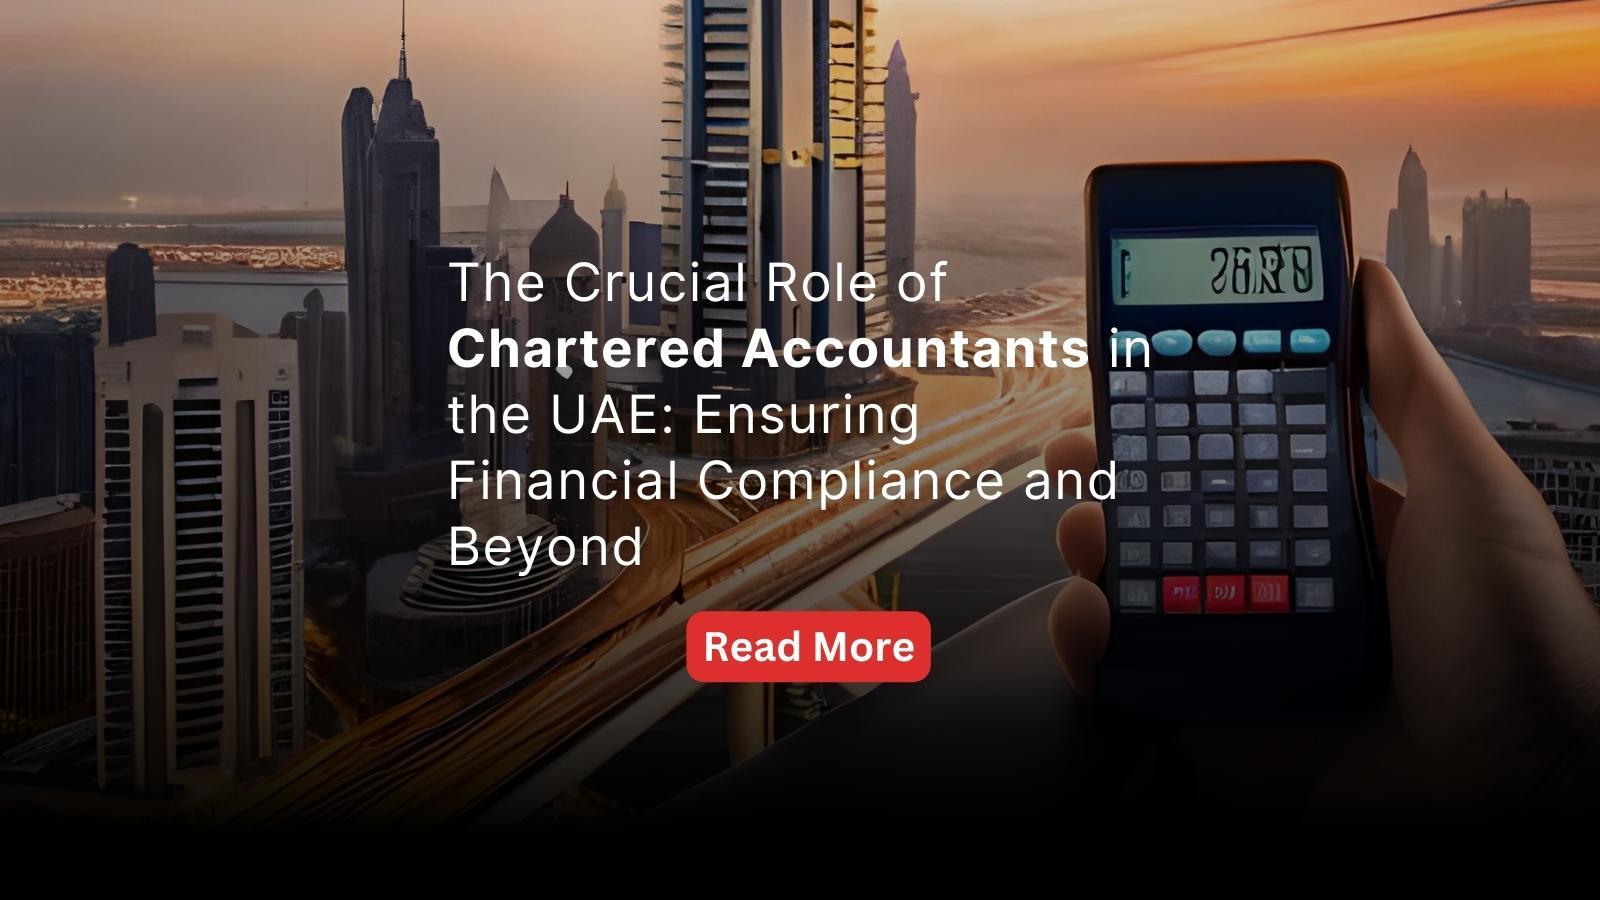 The Role of Chartered Accountants in UAE: Ensuring Financial Compliance and Beyond